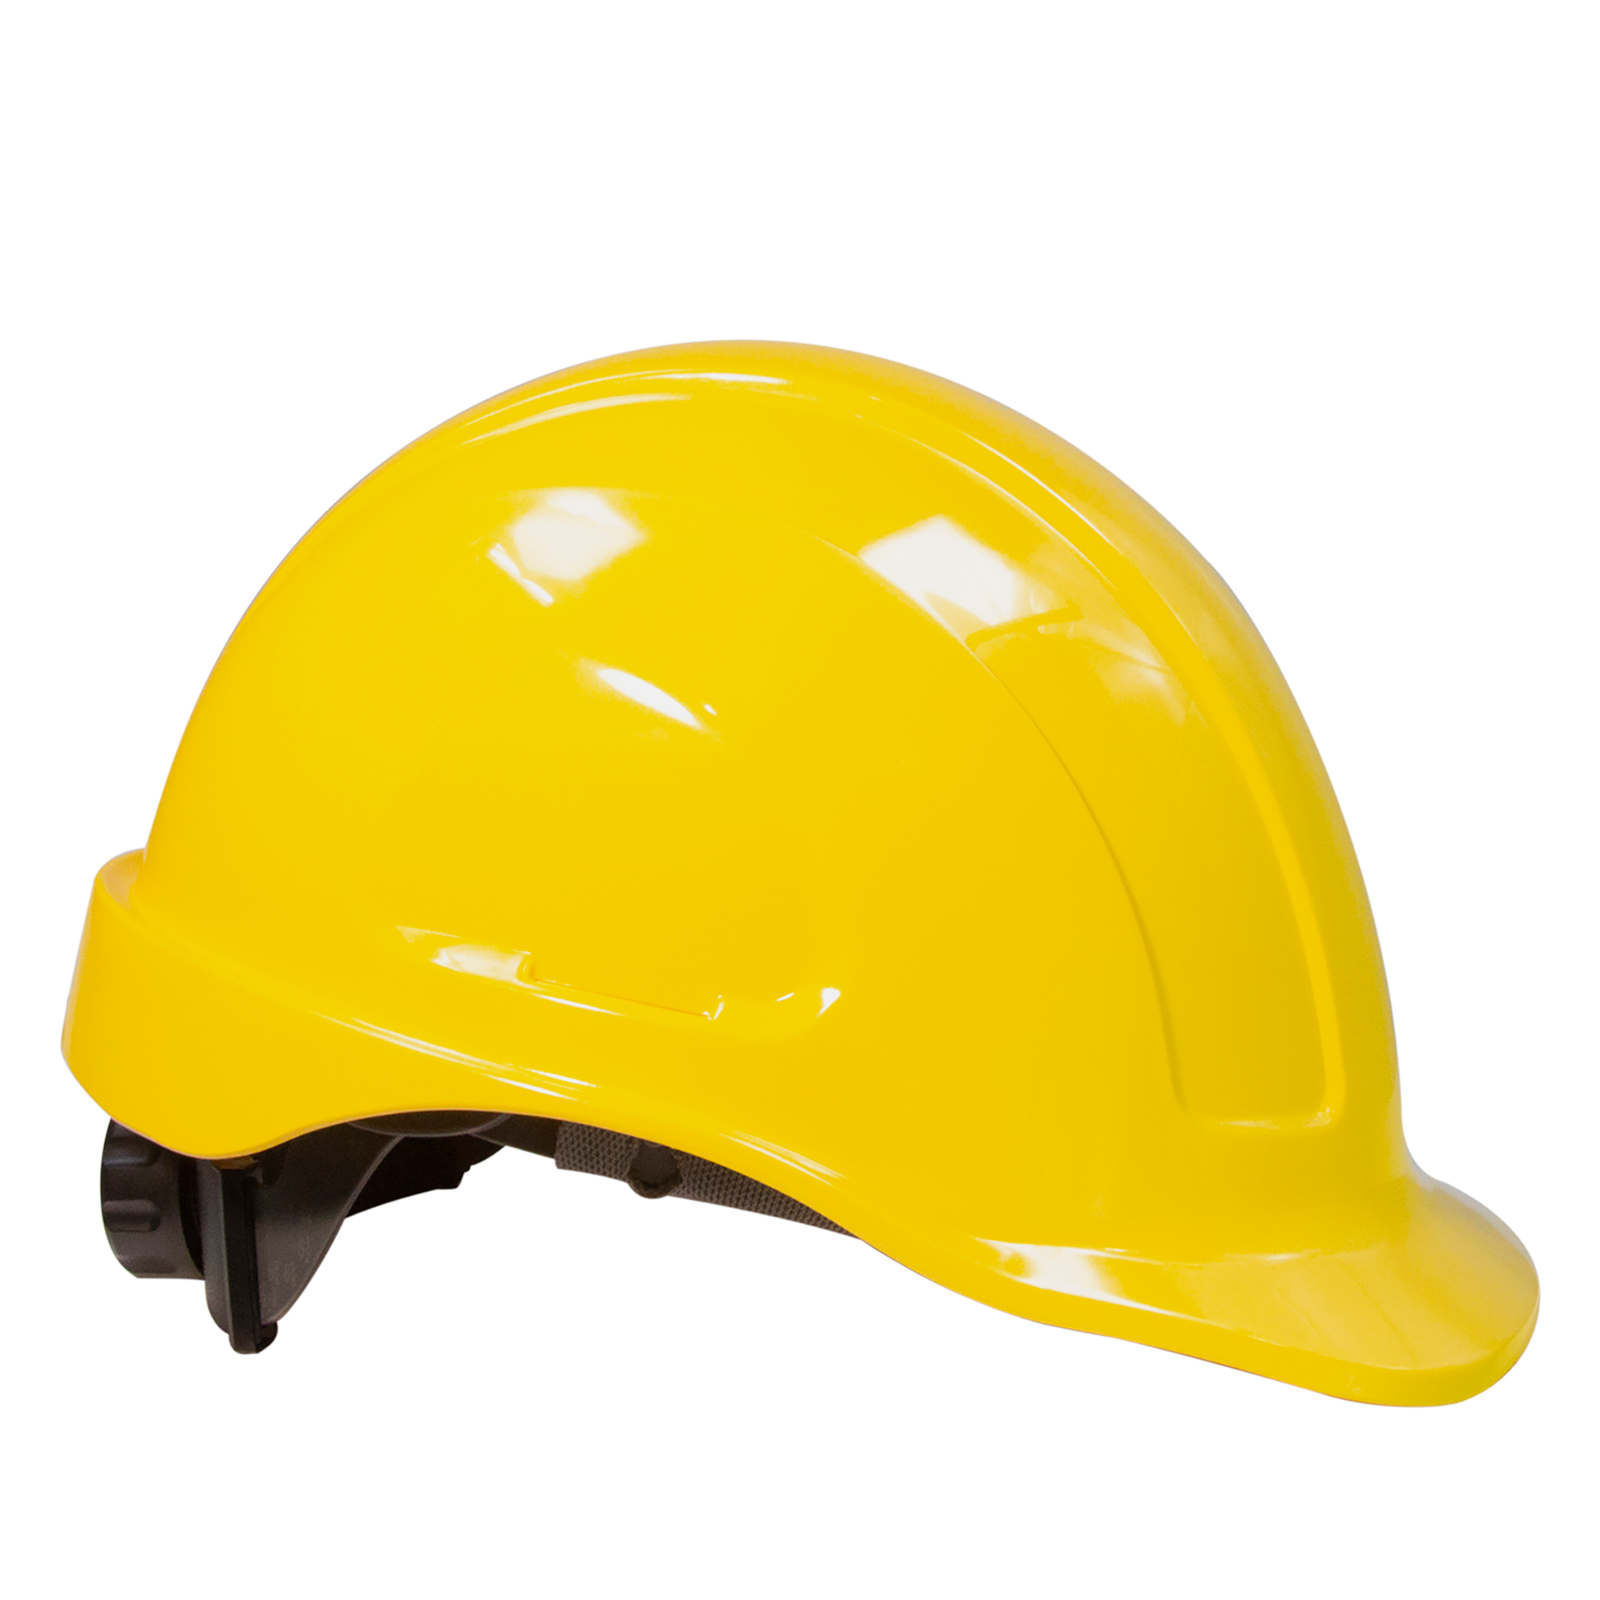 Diagonal view of a yellow cap style safety hard hat with 4 point suspension for head protection